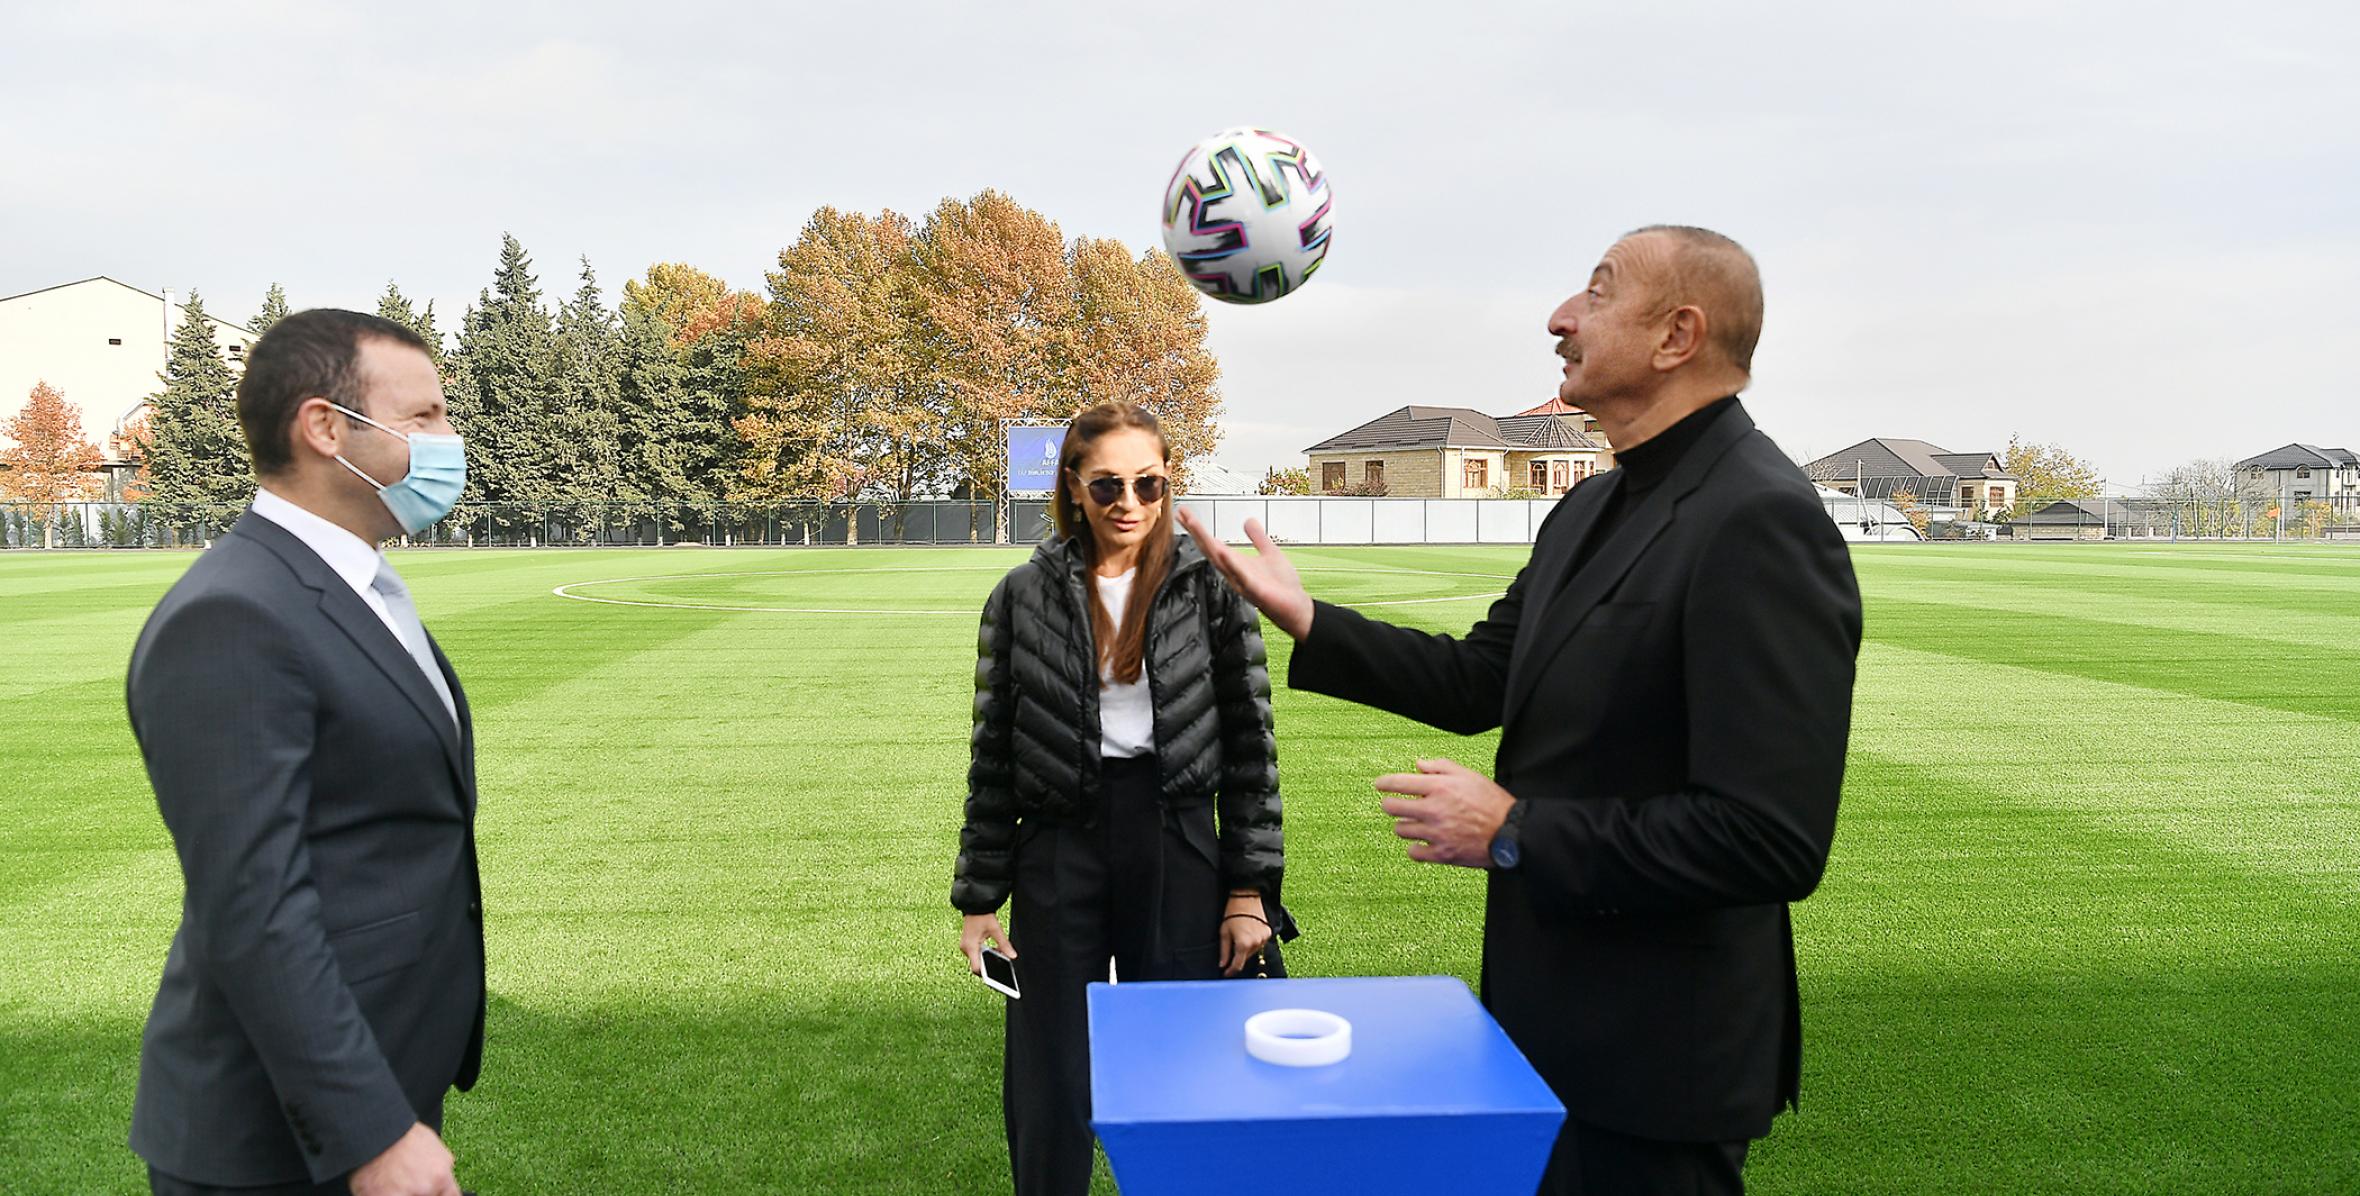 Ilham Aliyev and First Lady Mehriban Aliyeva inaugurated a new Creativity Center